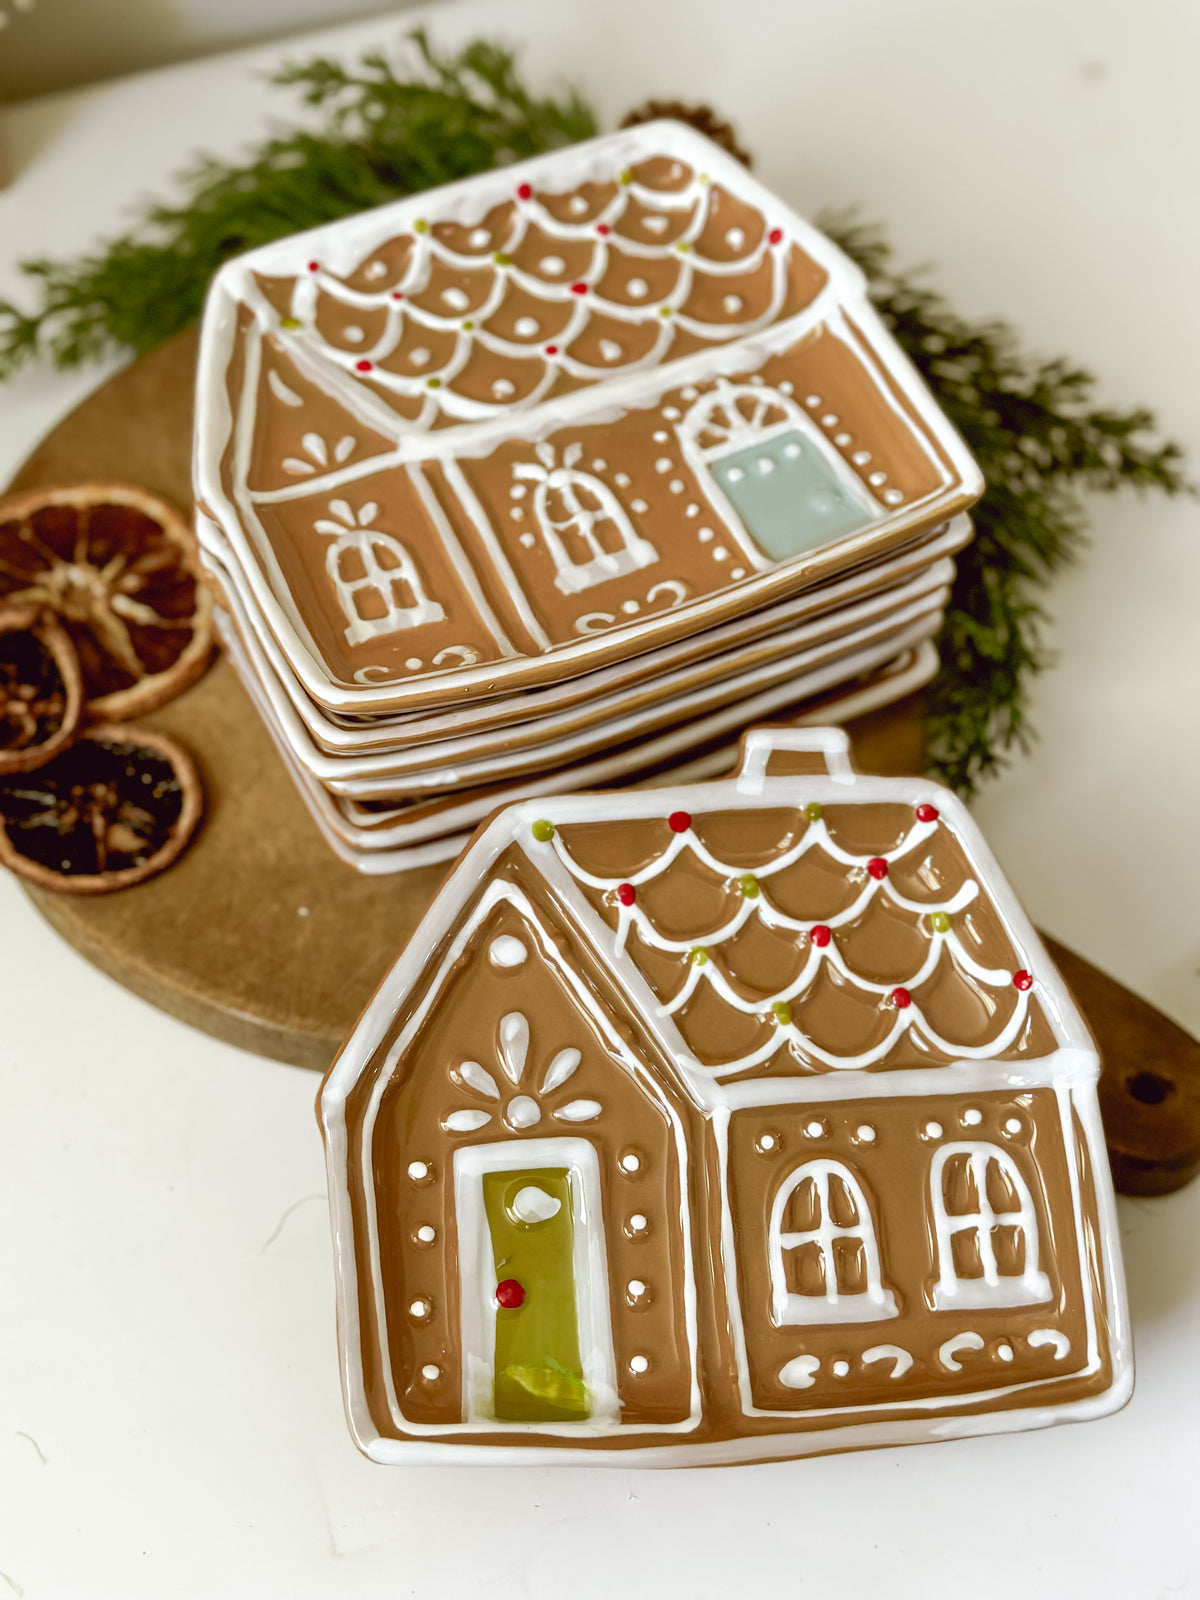 Gingerbread House Plate - Hand-Painted